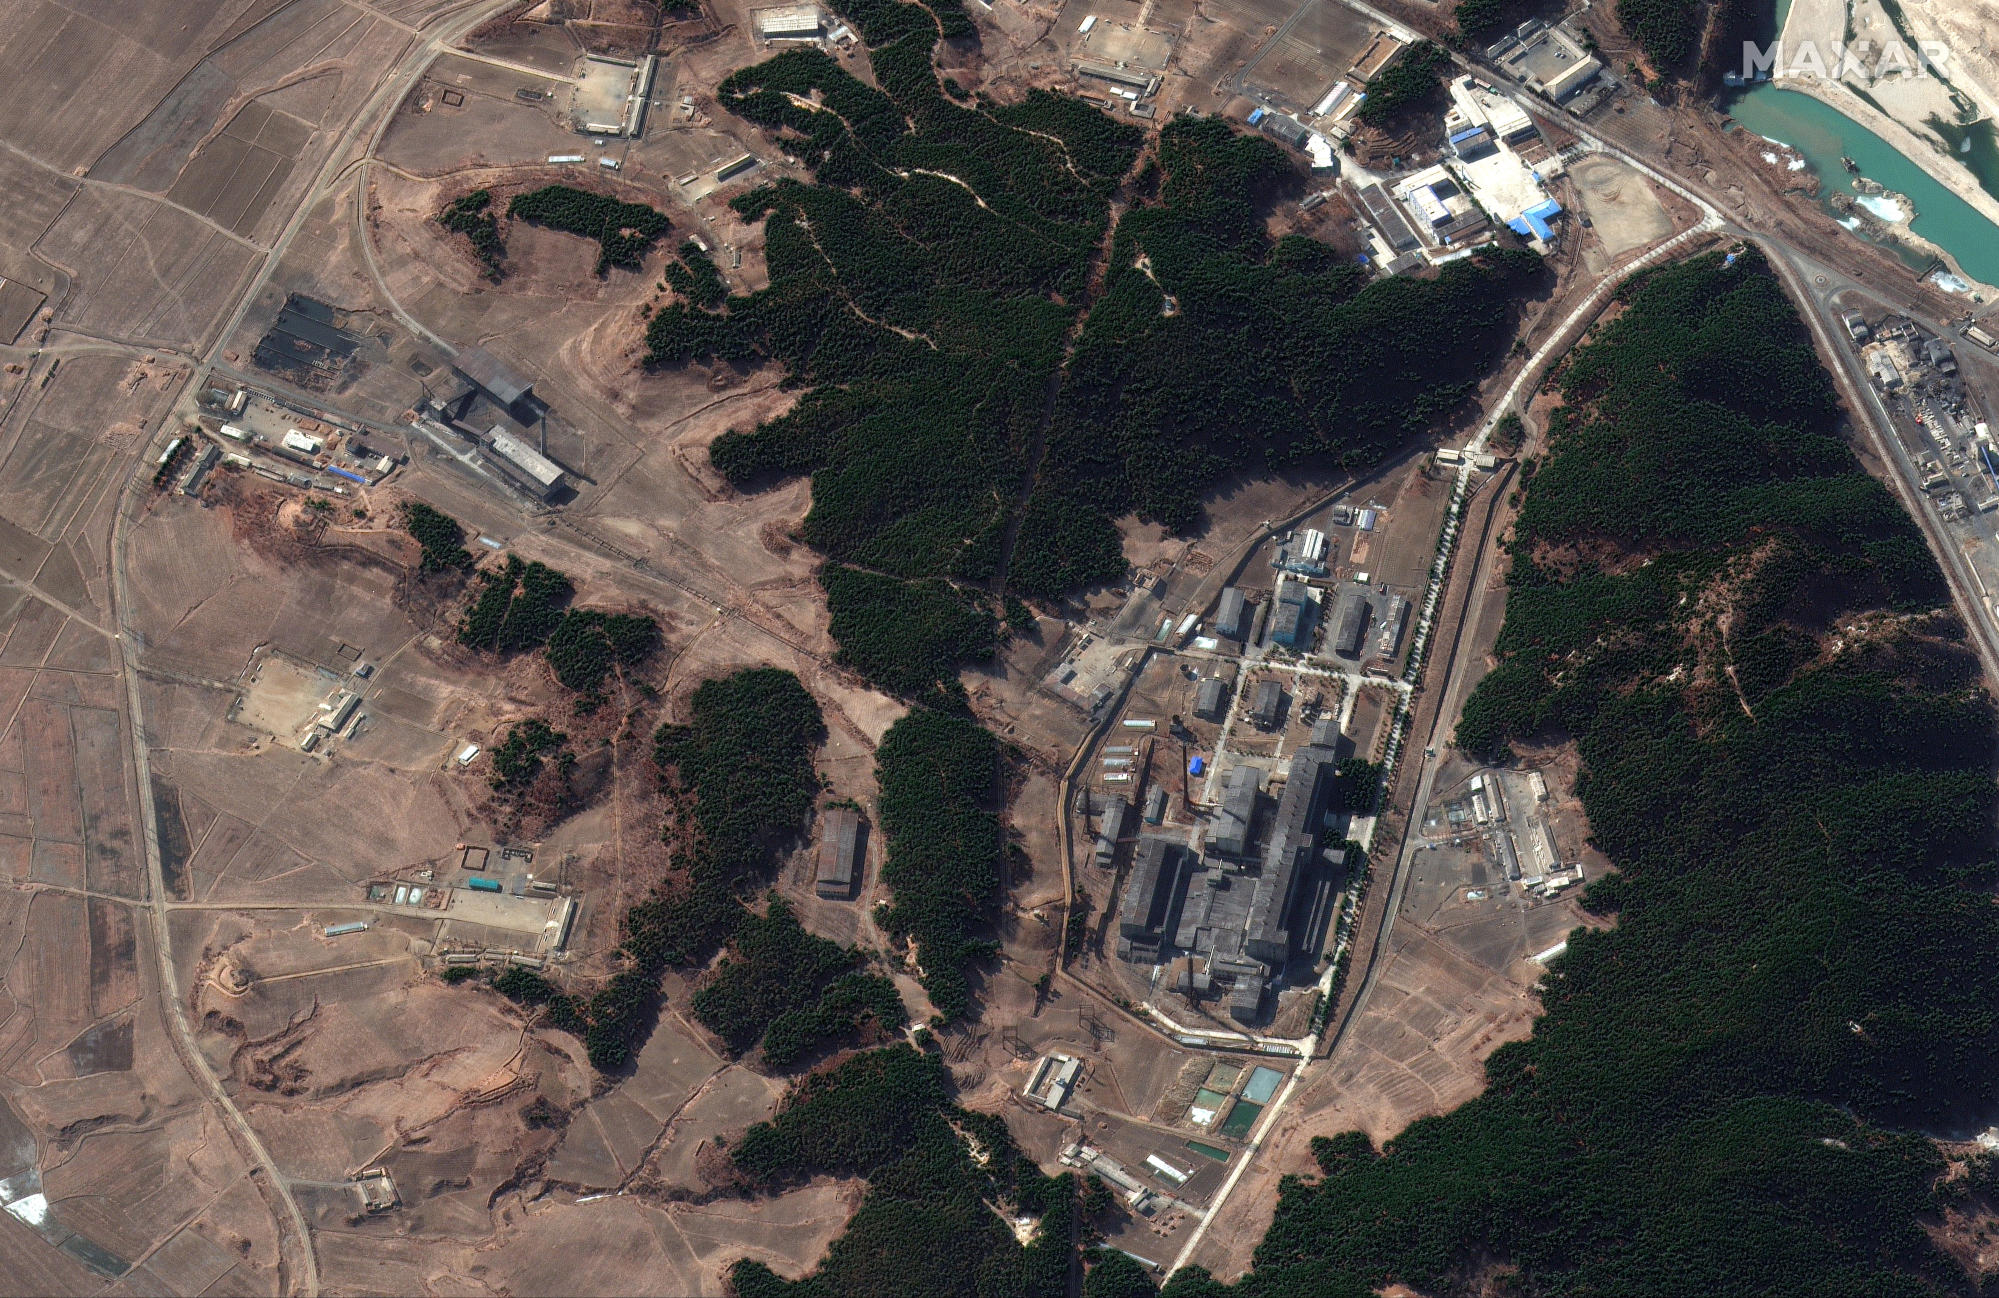 Photos show North Korea may be trying to extract plutonium